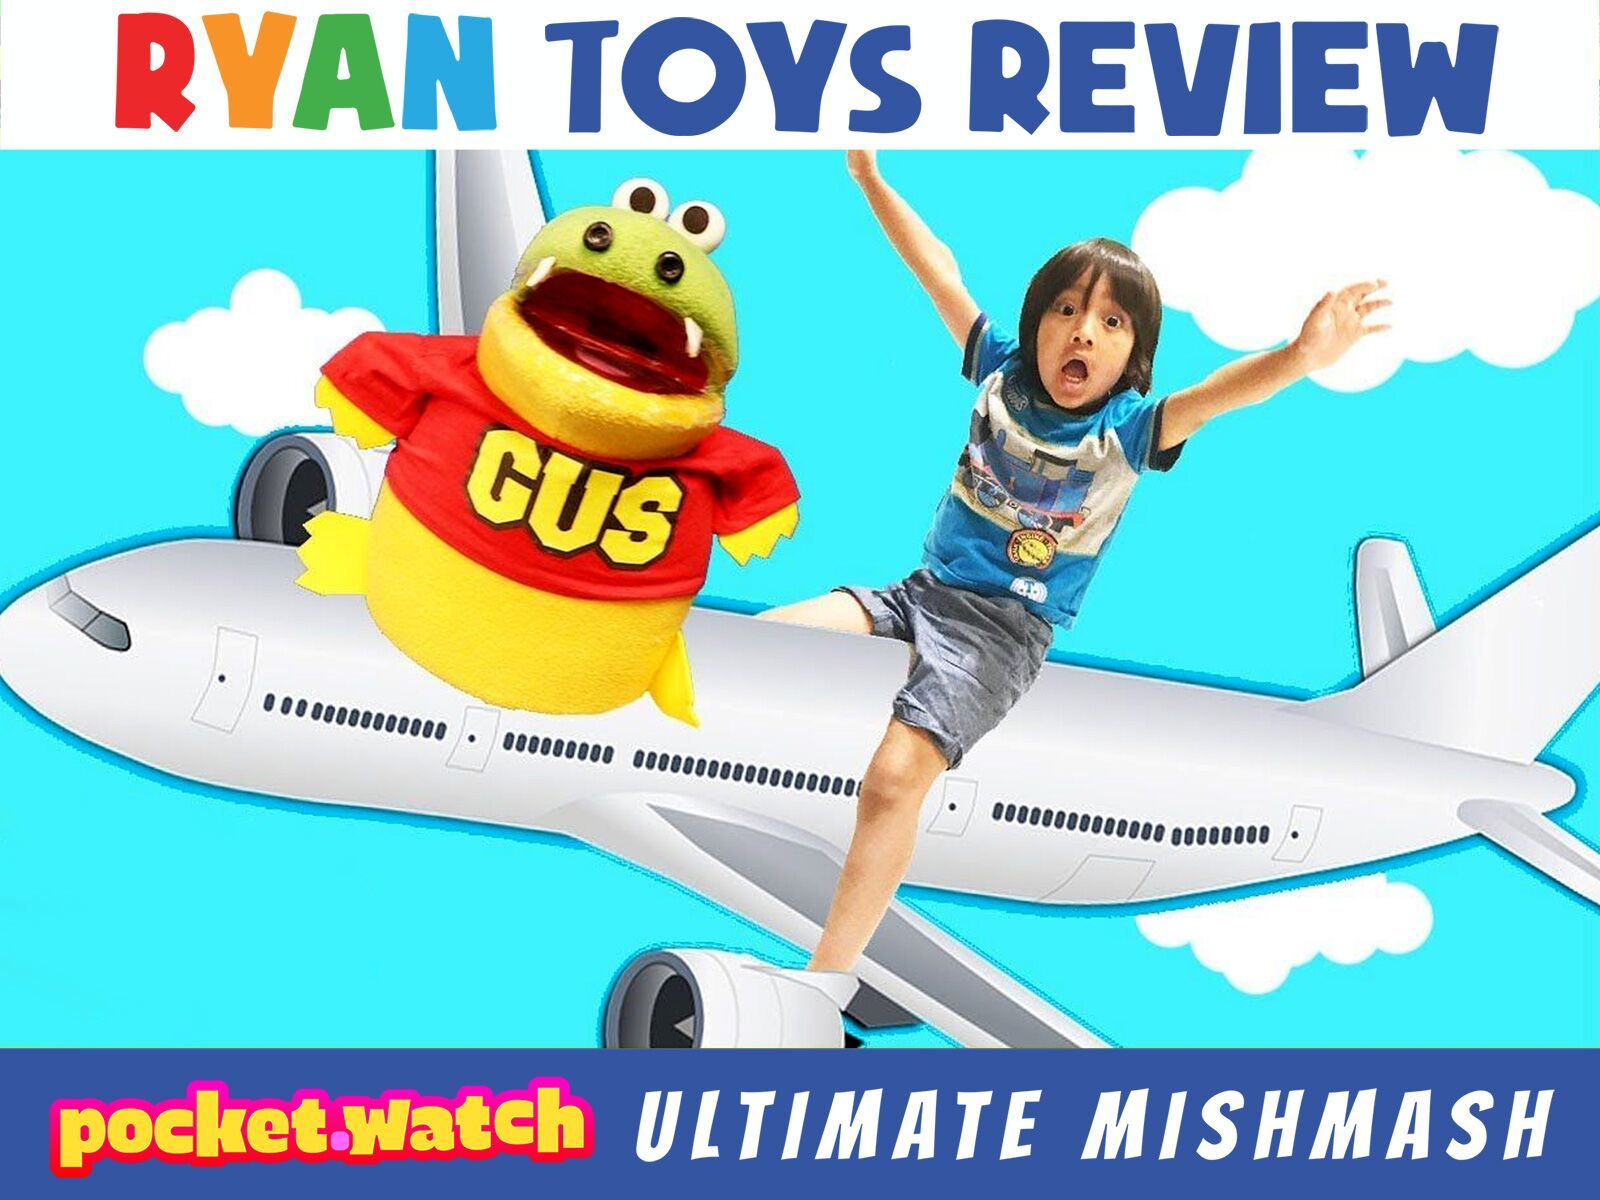 pocket.watch Ryan Toys Review Ultimate mishmash (TV Series 2018– )